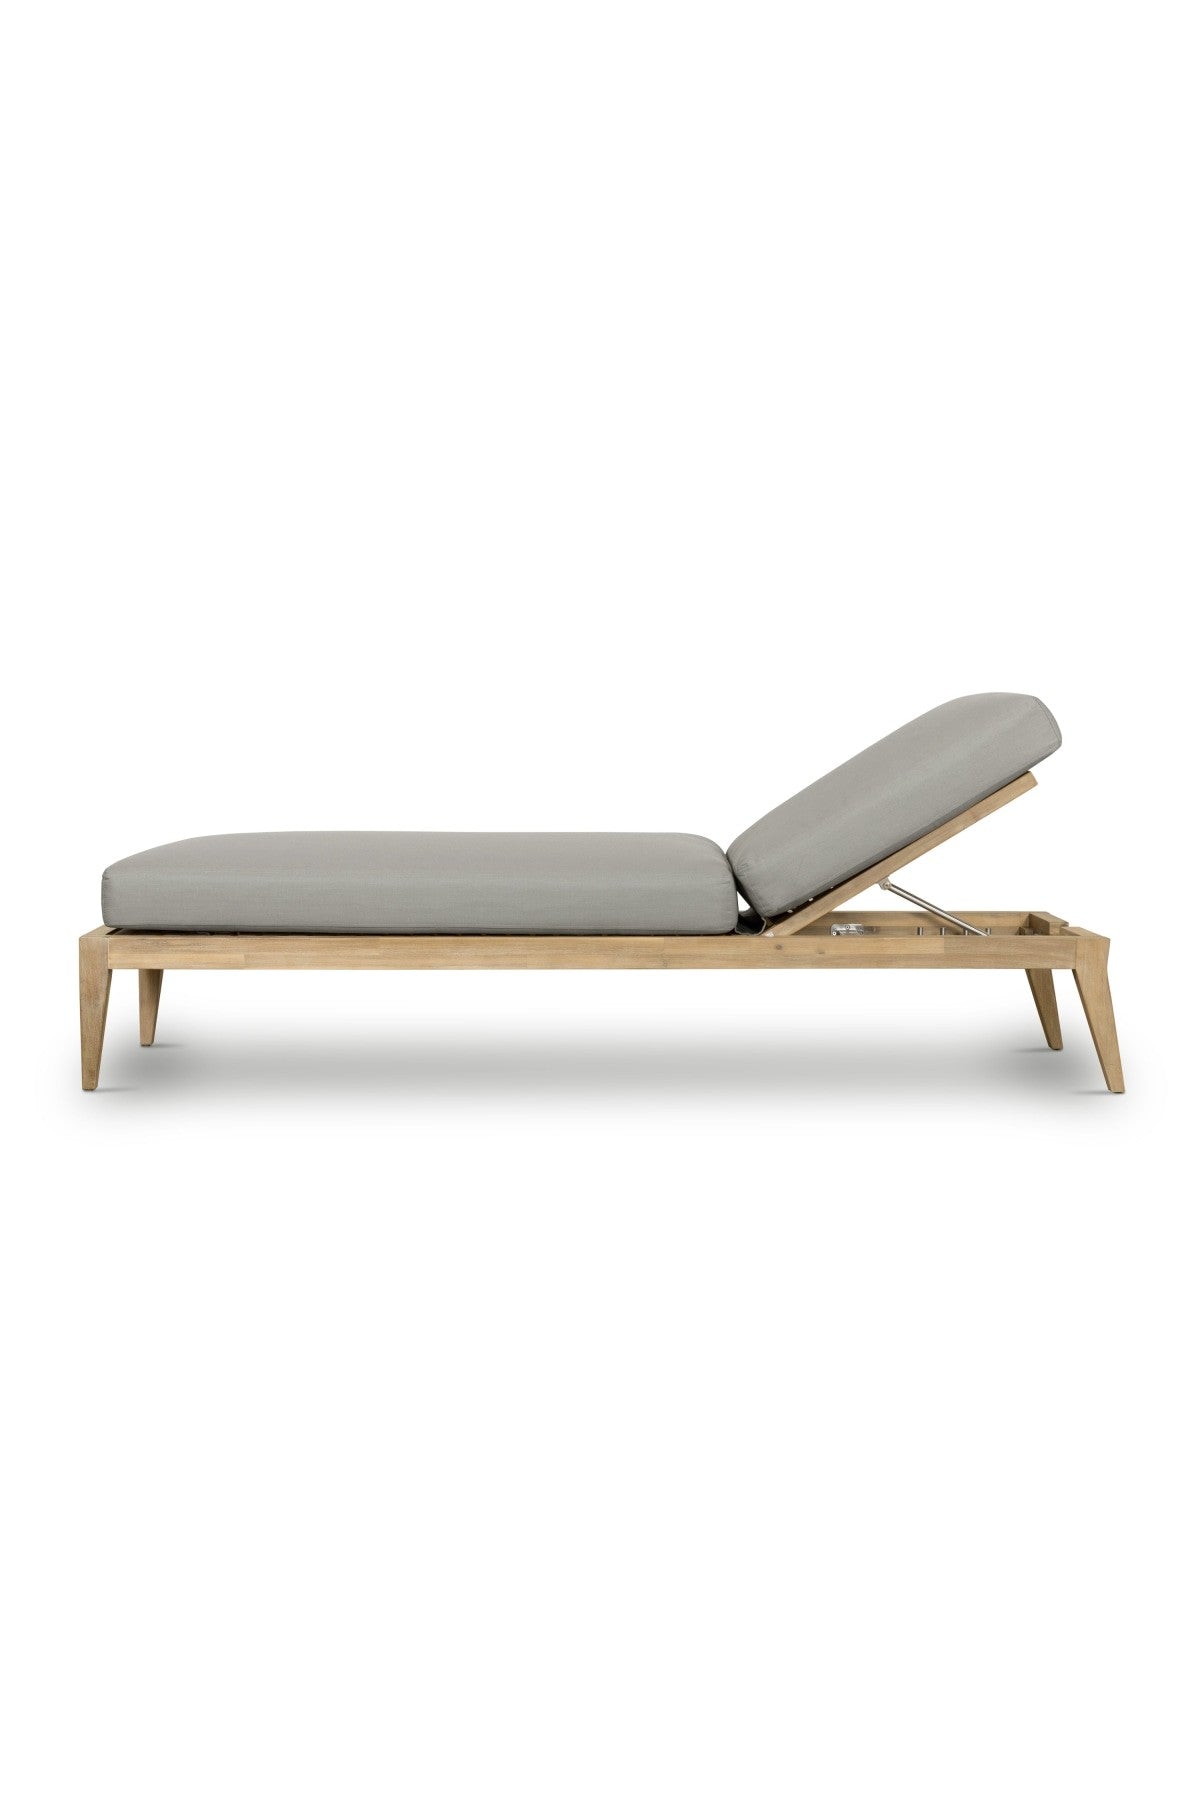 Baum Outdoor Chaise Lounge